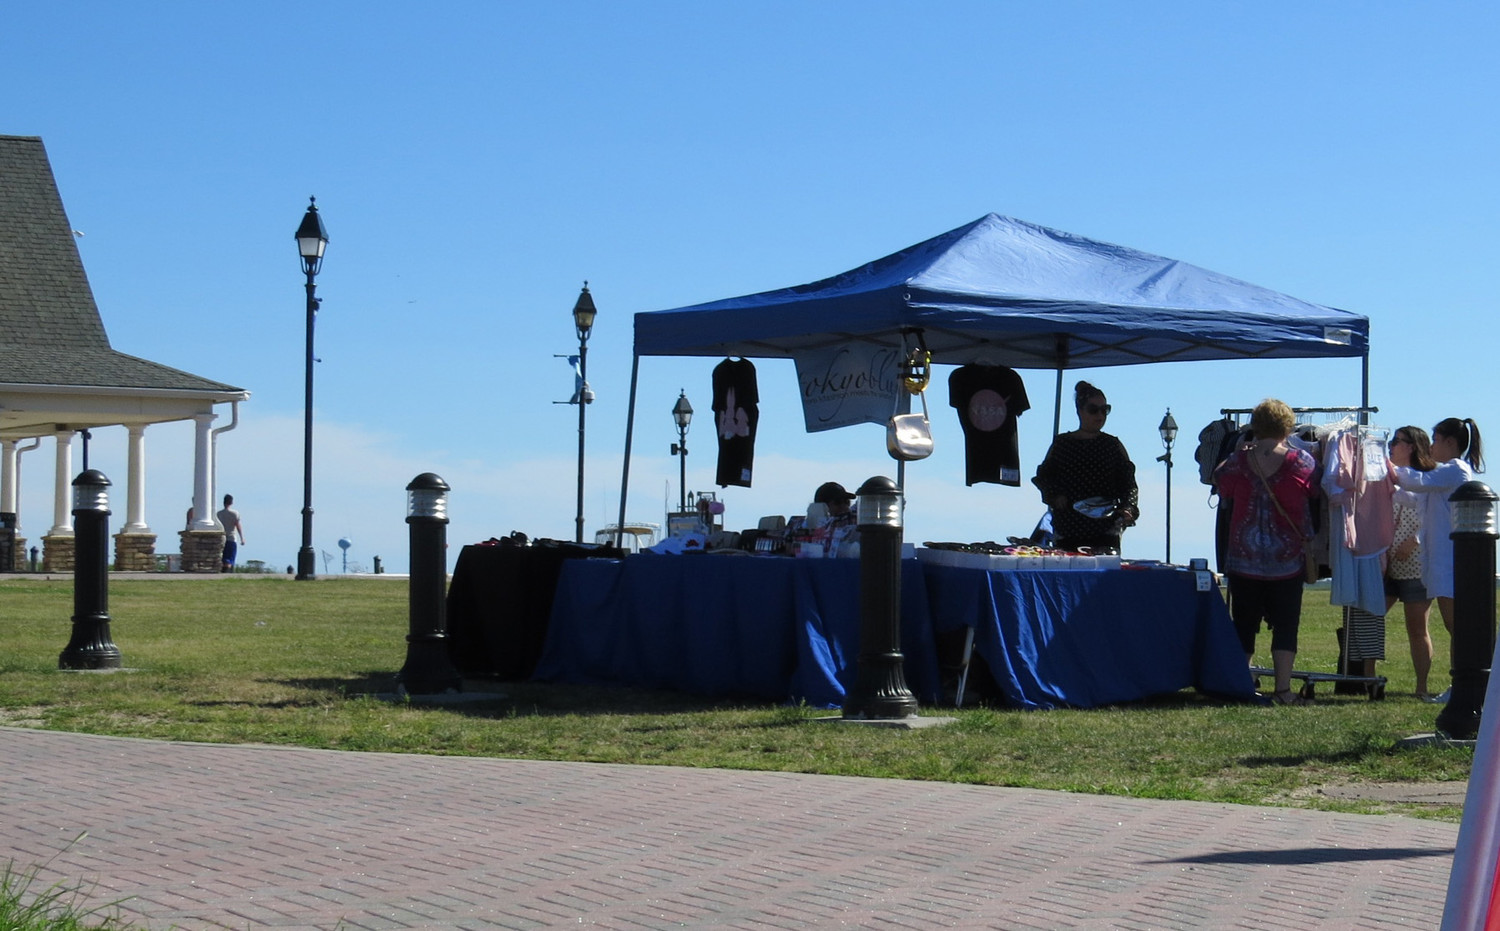 Vendors welcomed vistors from Long Island during the Sea Breeze Park Expo in Freeport.